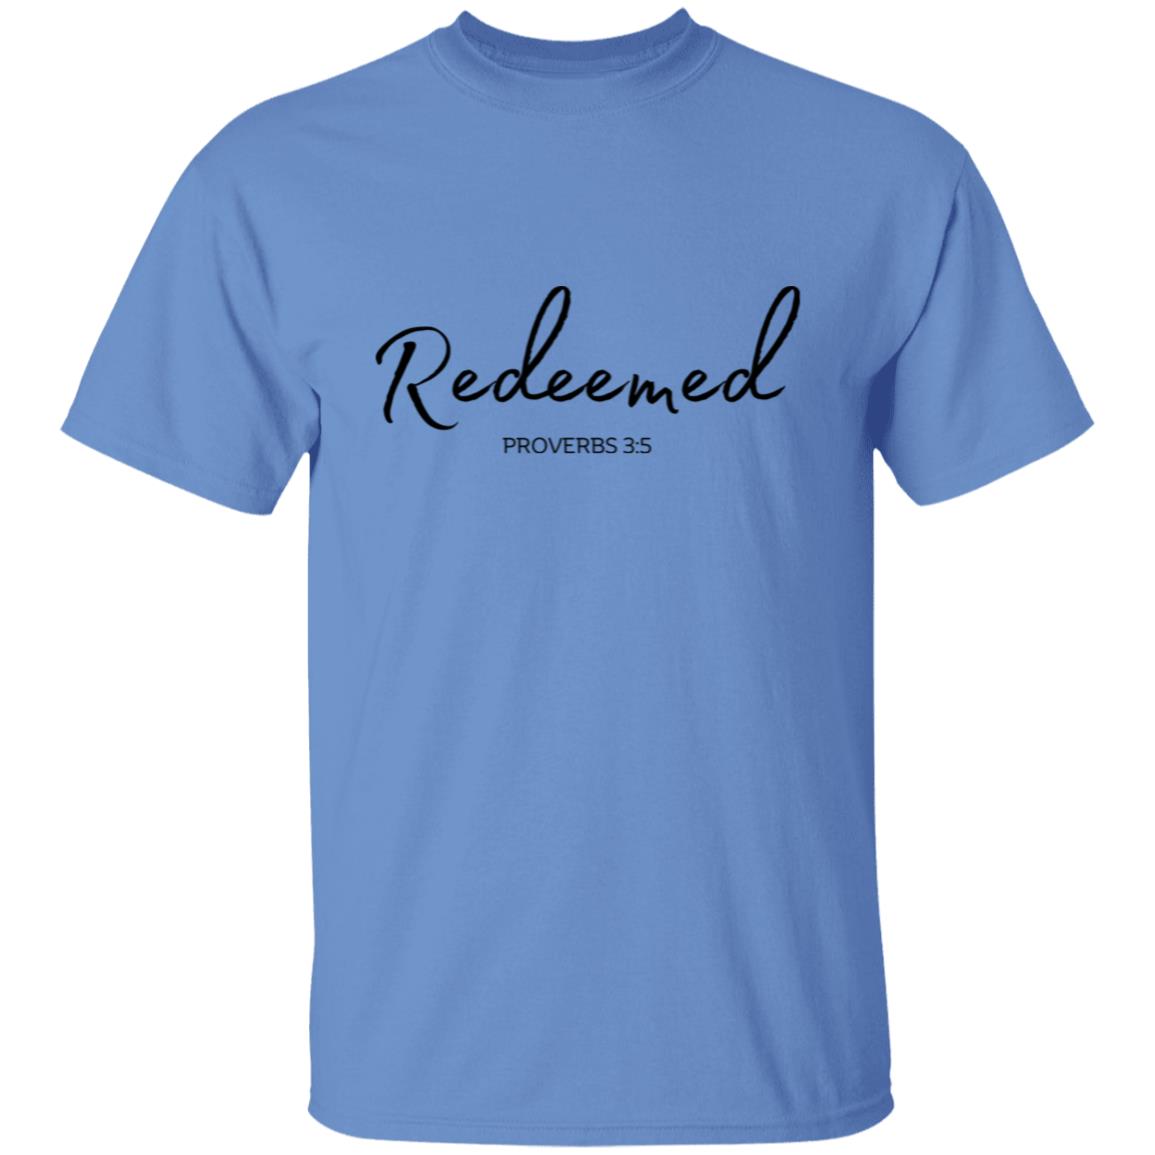 Get trendy with Redeemed (2) Redeemed (Proverbs 3:5) T-Shirt Words of Faith Series (Black Text) - T-Shirts available at Good Gift Company. Grab yours for $21.95 today!